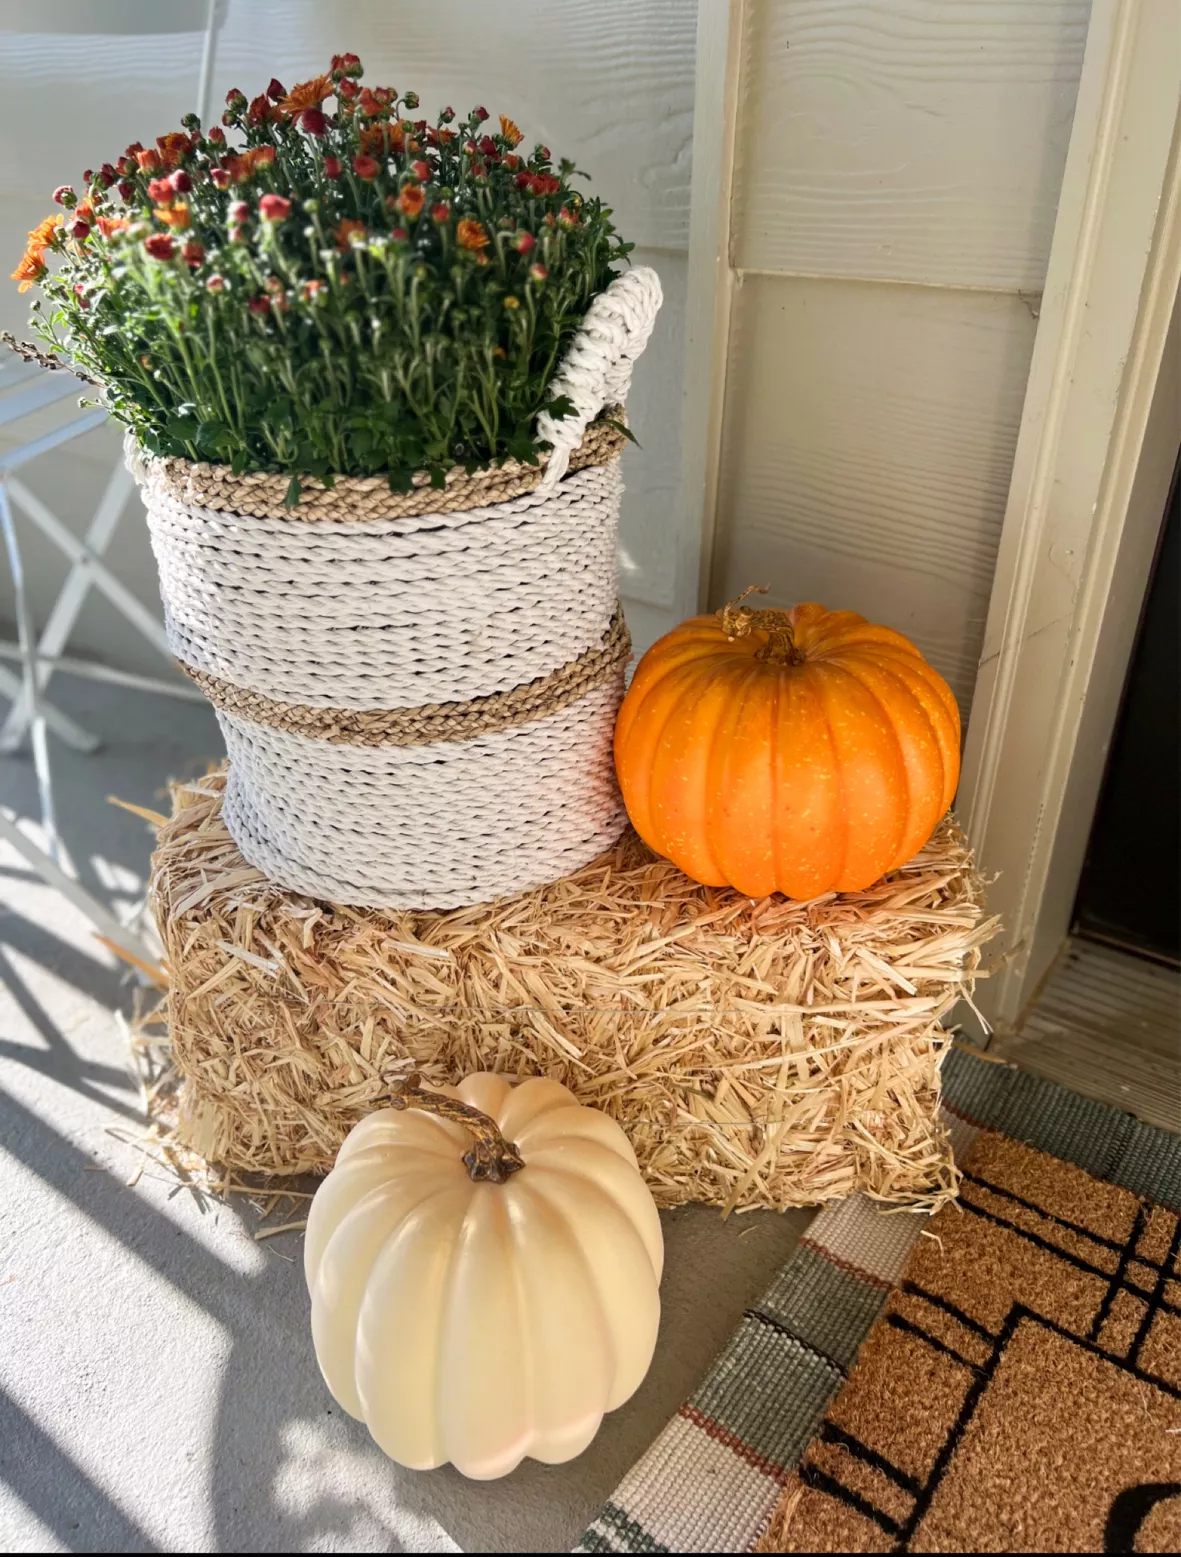 Fall, Harvest 13-inch Decorative Natural Straw Bale, Way to Celebrate 